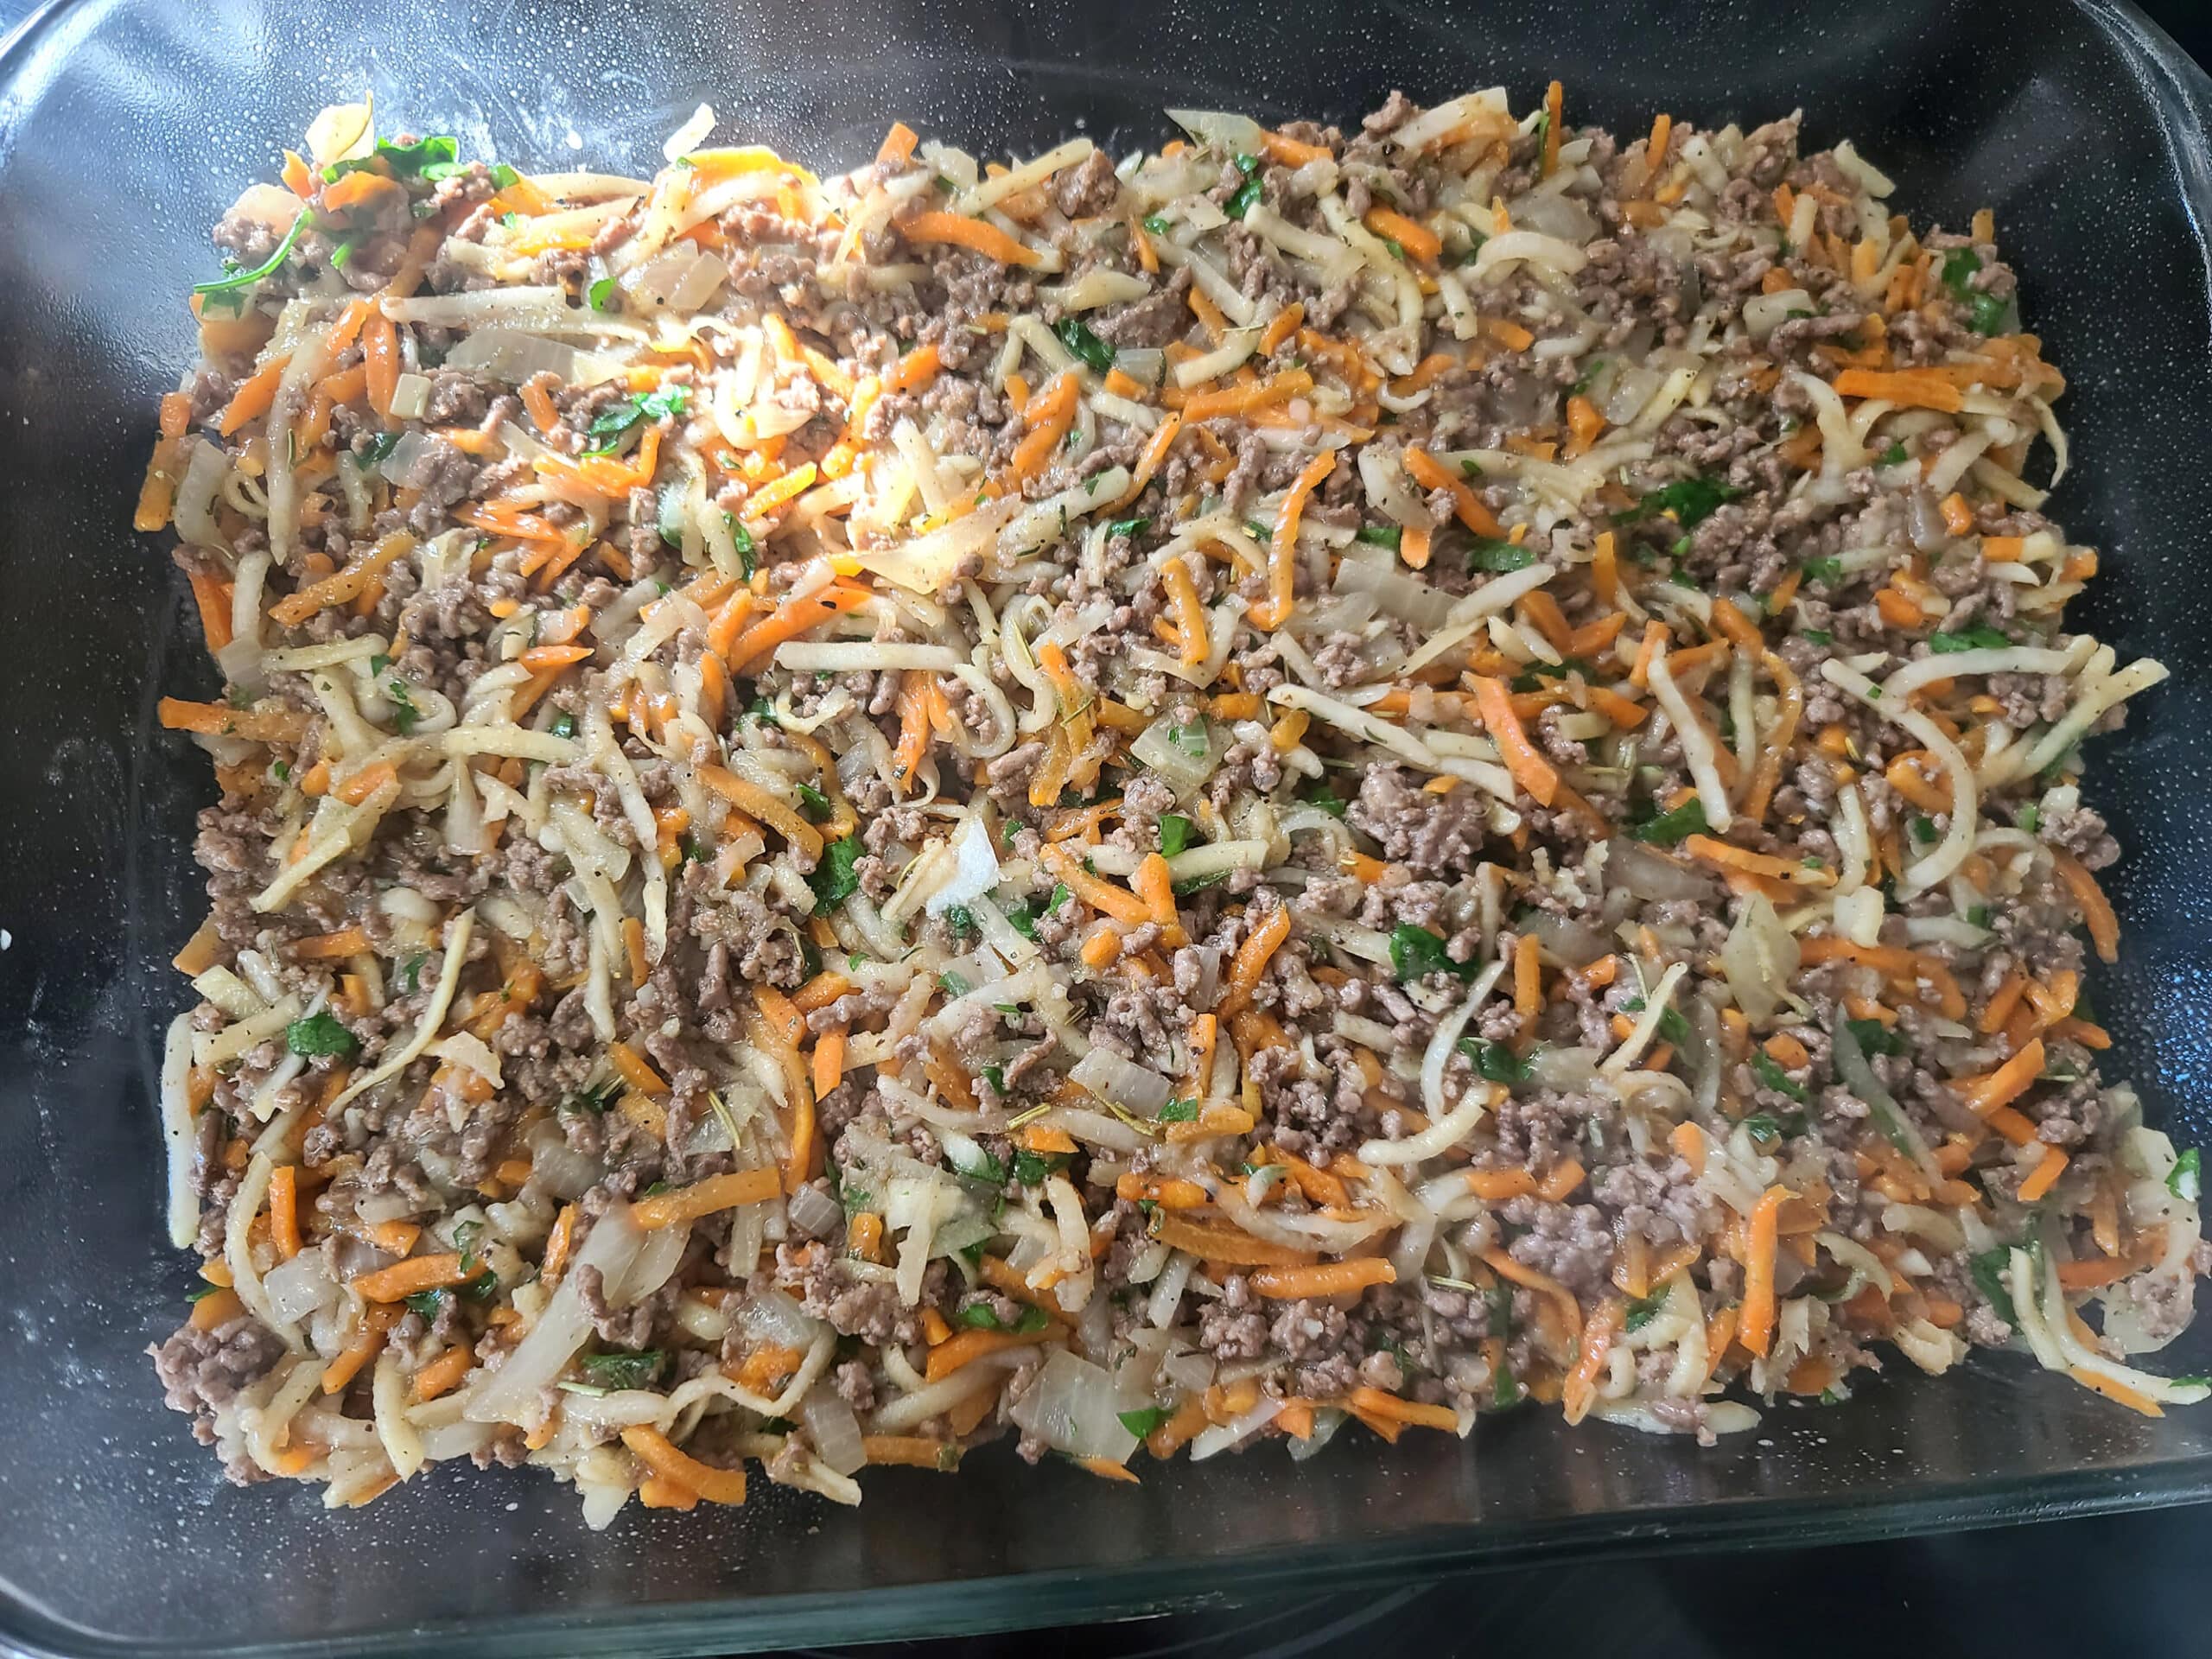 The ground beef and vegetable mixture being spread in a 8 x 13 inch pan.